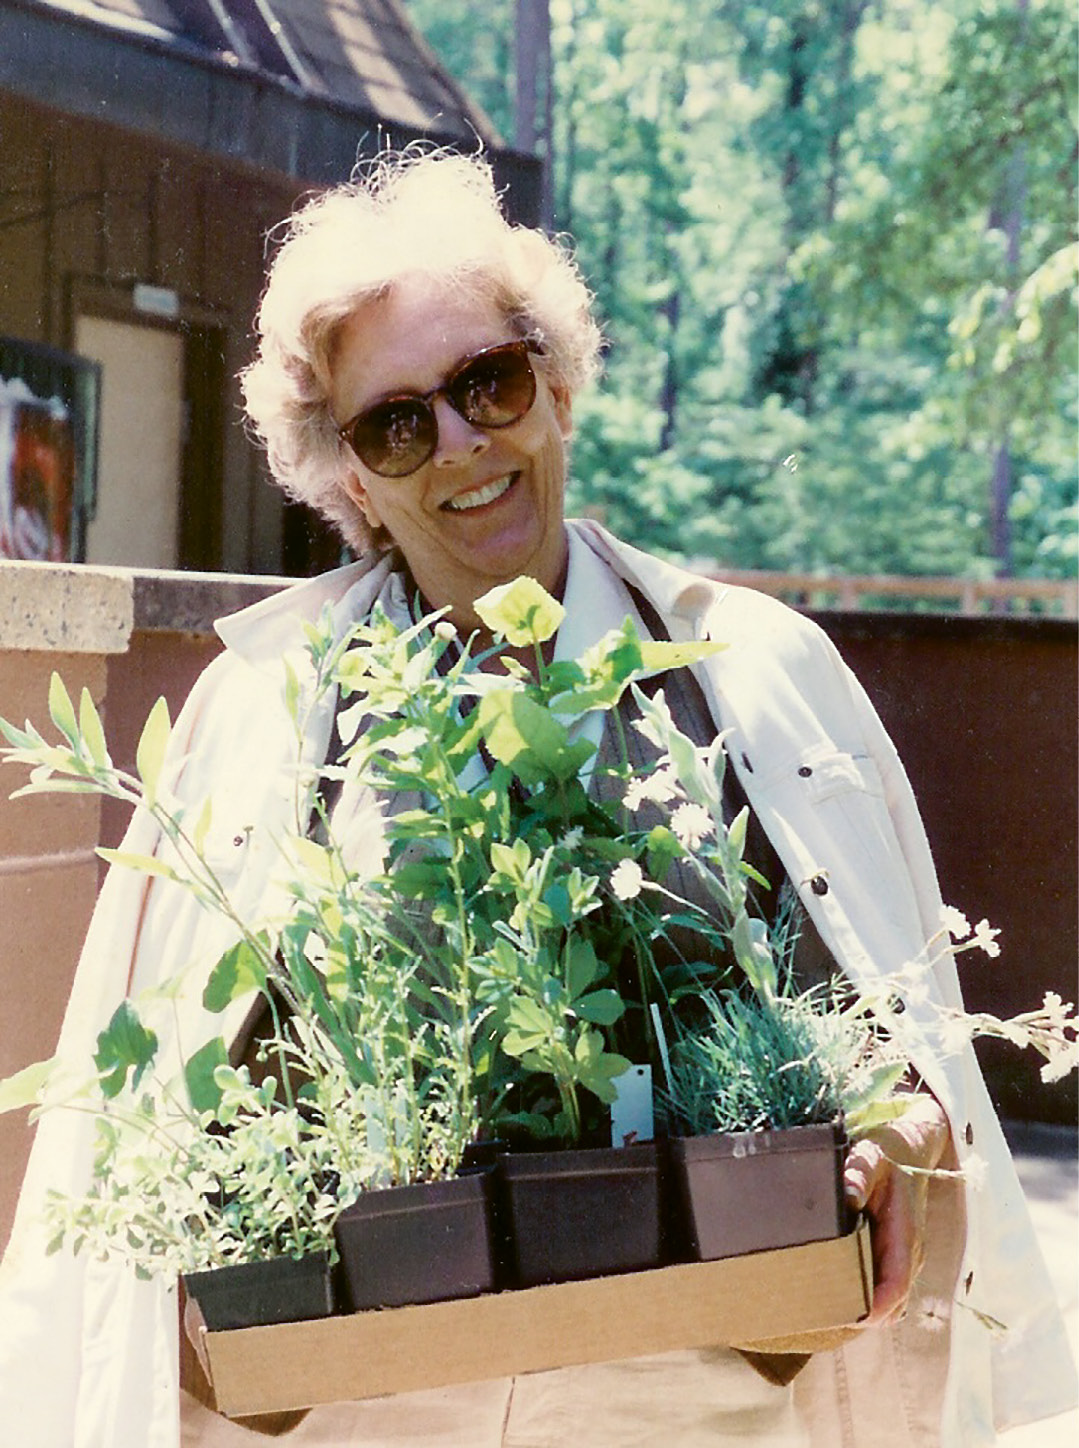 EVERGREEN THUMB: Patti at the Charleston Garden Festival, which predated Charleston Horticultural Society and its annual Plantasia event